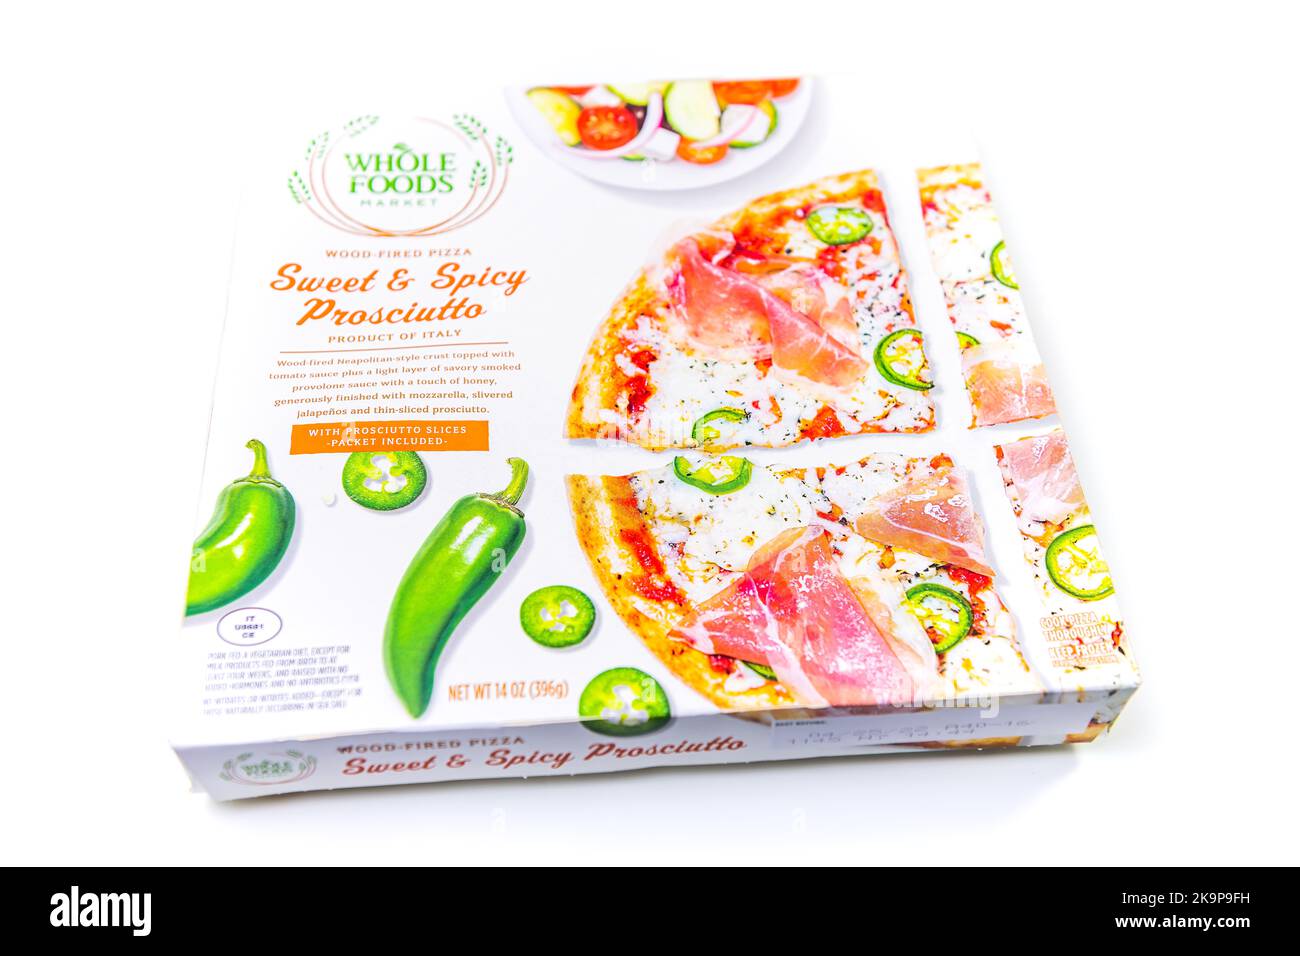 https://c8.alamy.com/comp/2K9P9FH/naples-usa-october-21-2021-whole-foods-market-brand-private-label-made-in-italy-box-of-sweet-spicy-gourmet-prosciutto-jalapeno-frozen-pizza-2K9P9FH.jpg